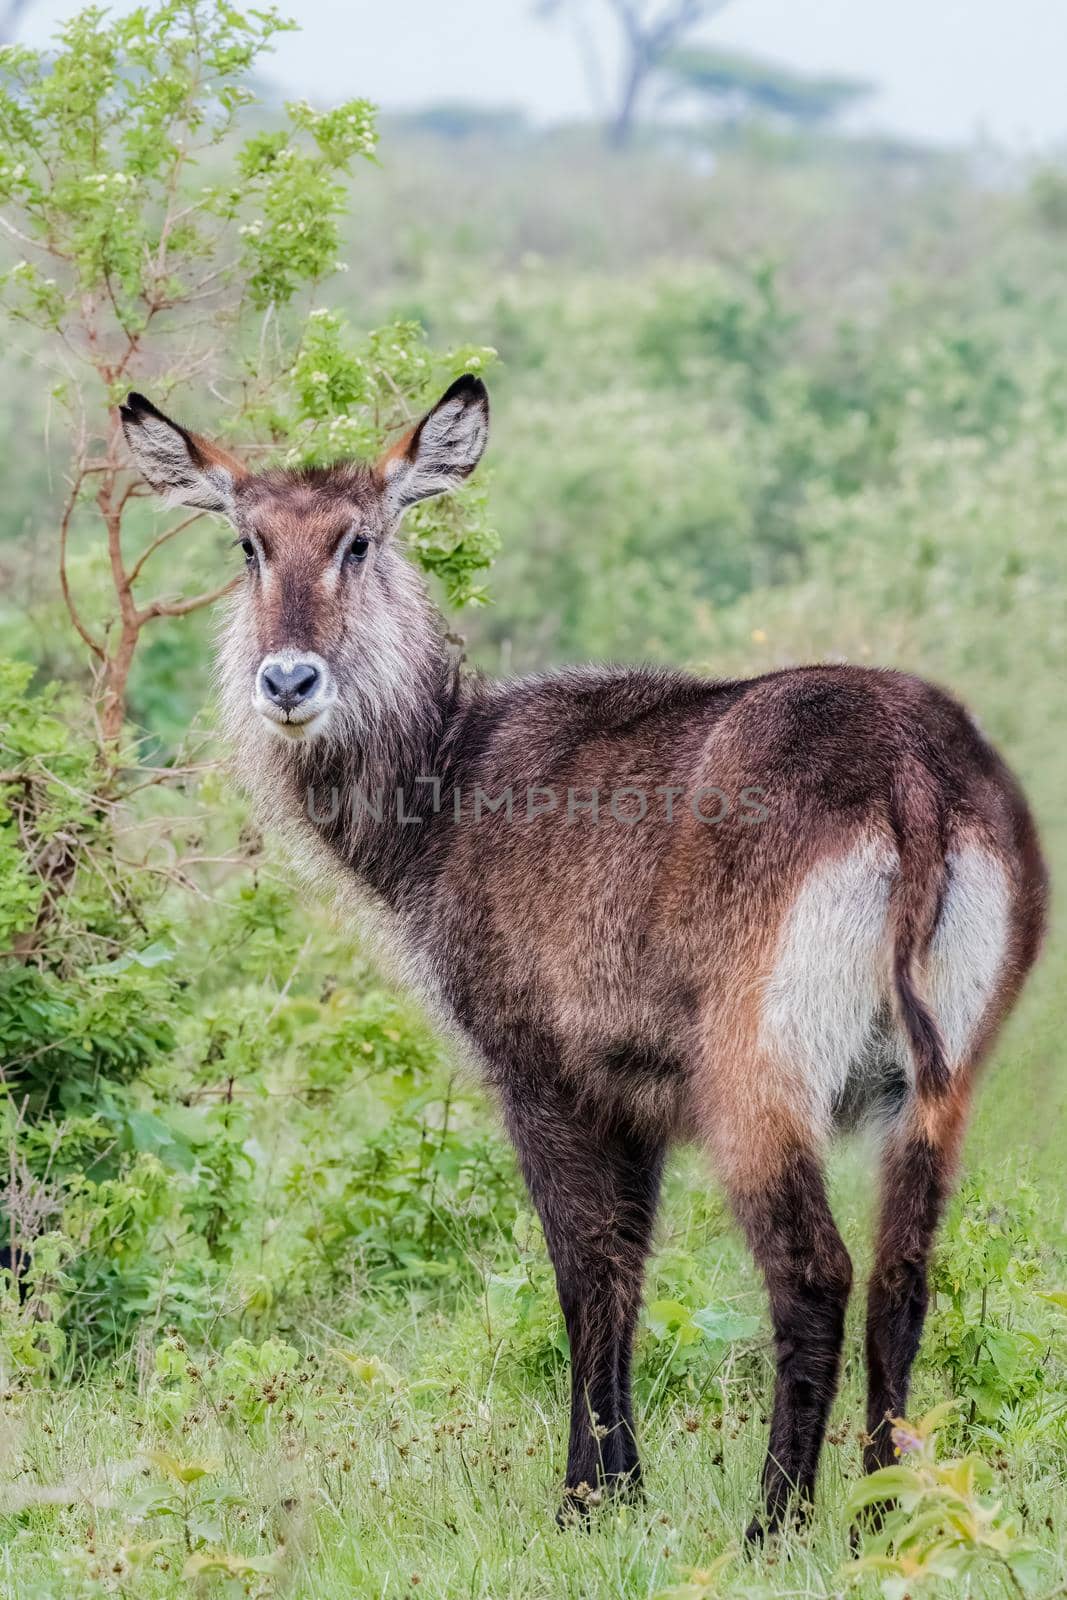 WaterBuck s a large antelope found widely in sub-Saharan Africa